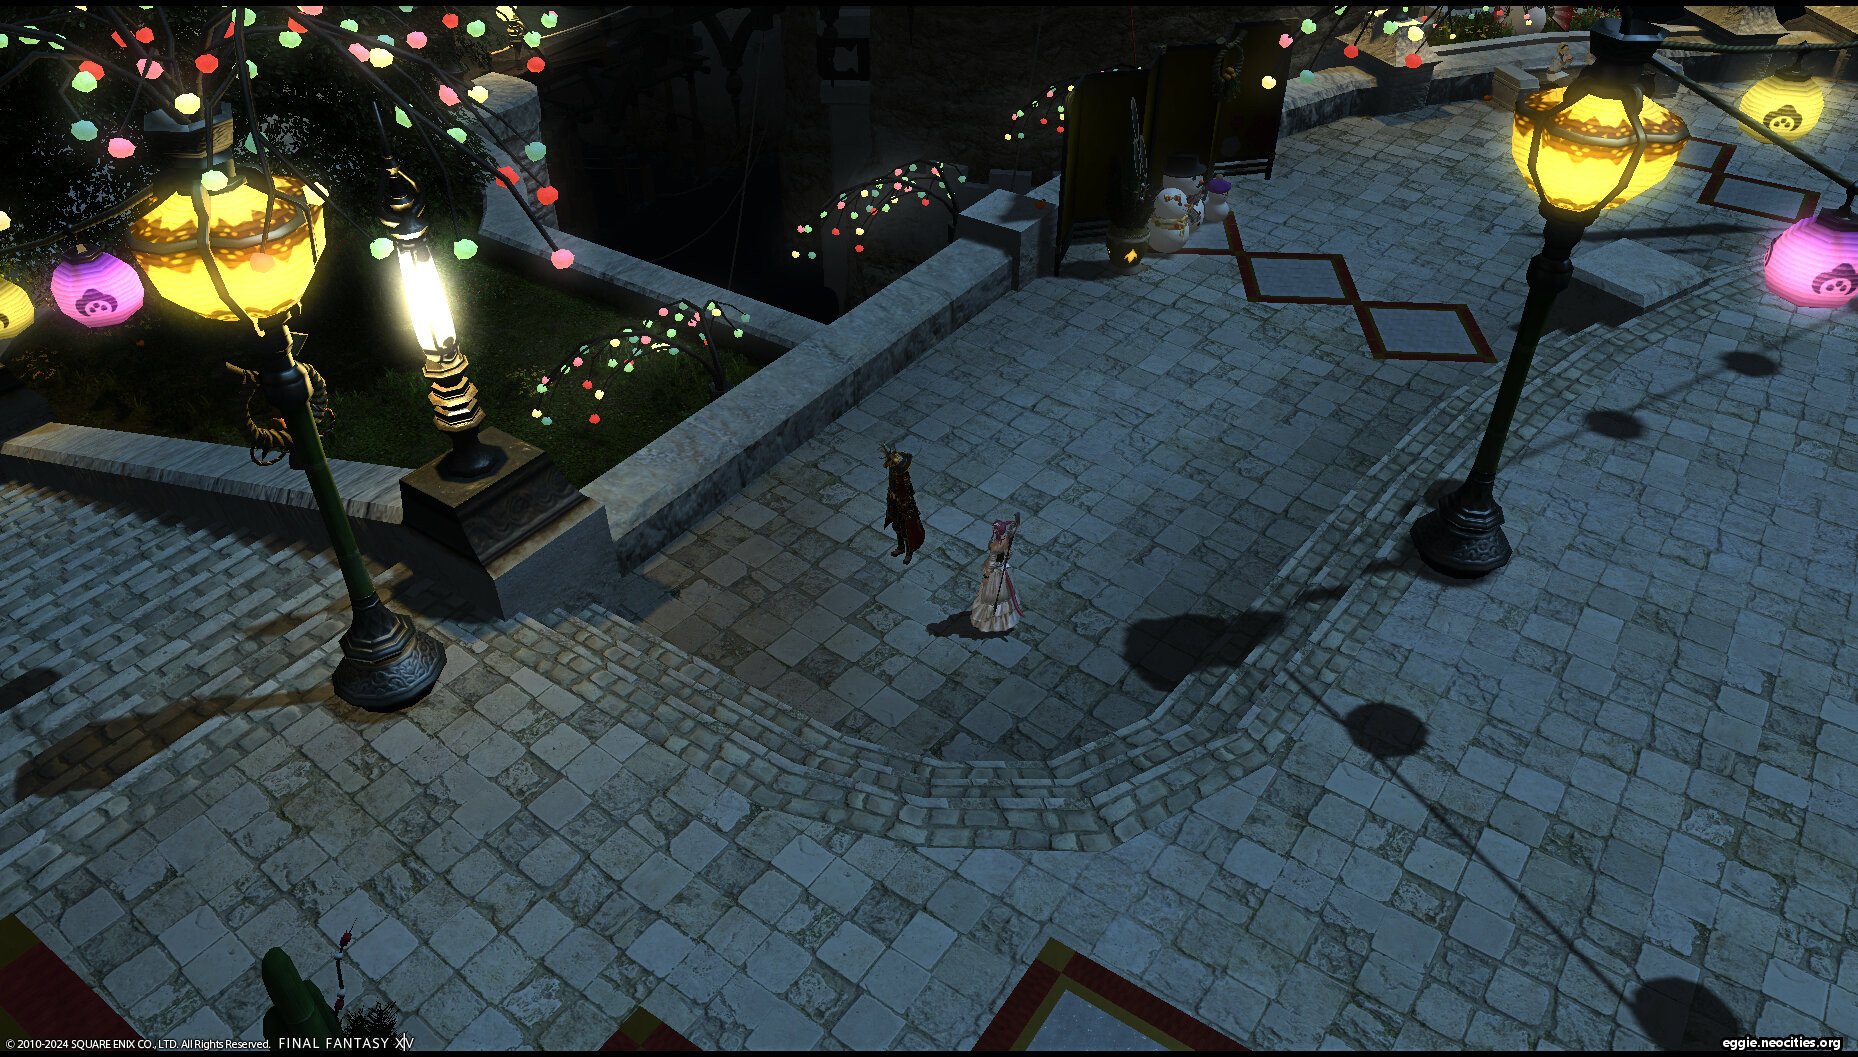 An aerial shot of Zel in Limsa, near the Aftcastle Aetheryte. The city is decorated for heavensturn with bright lights.